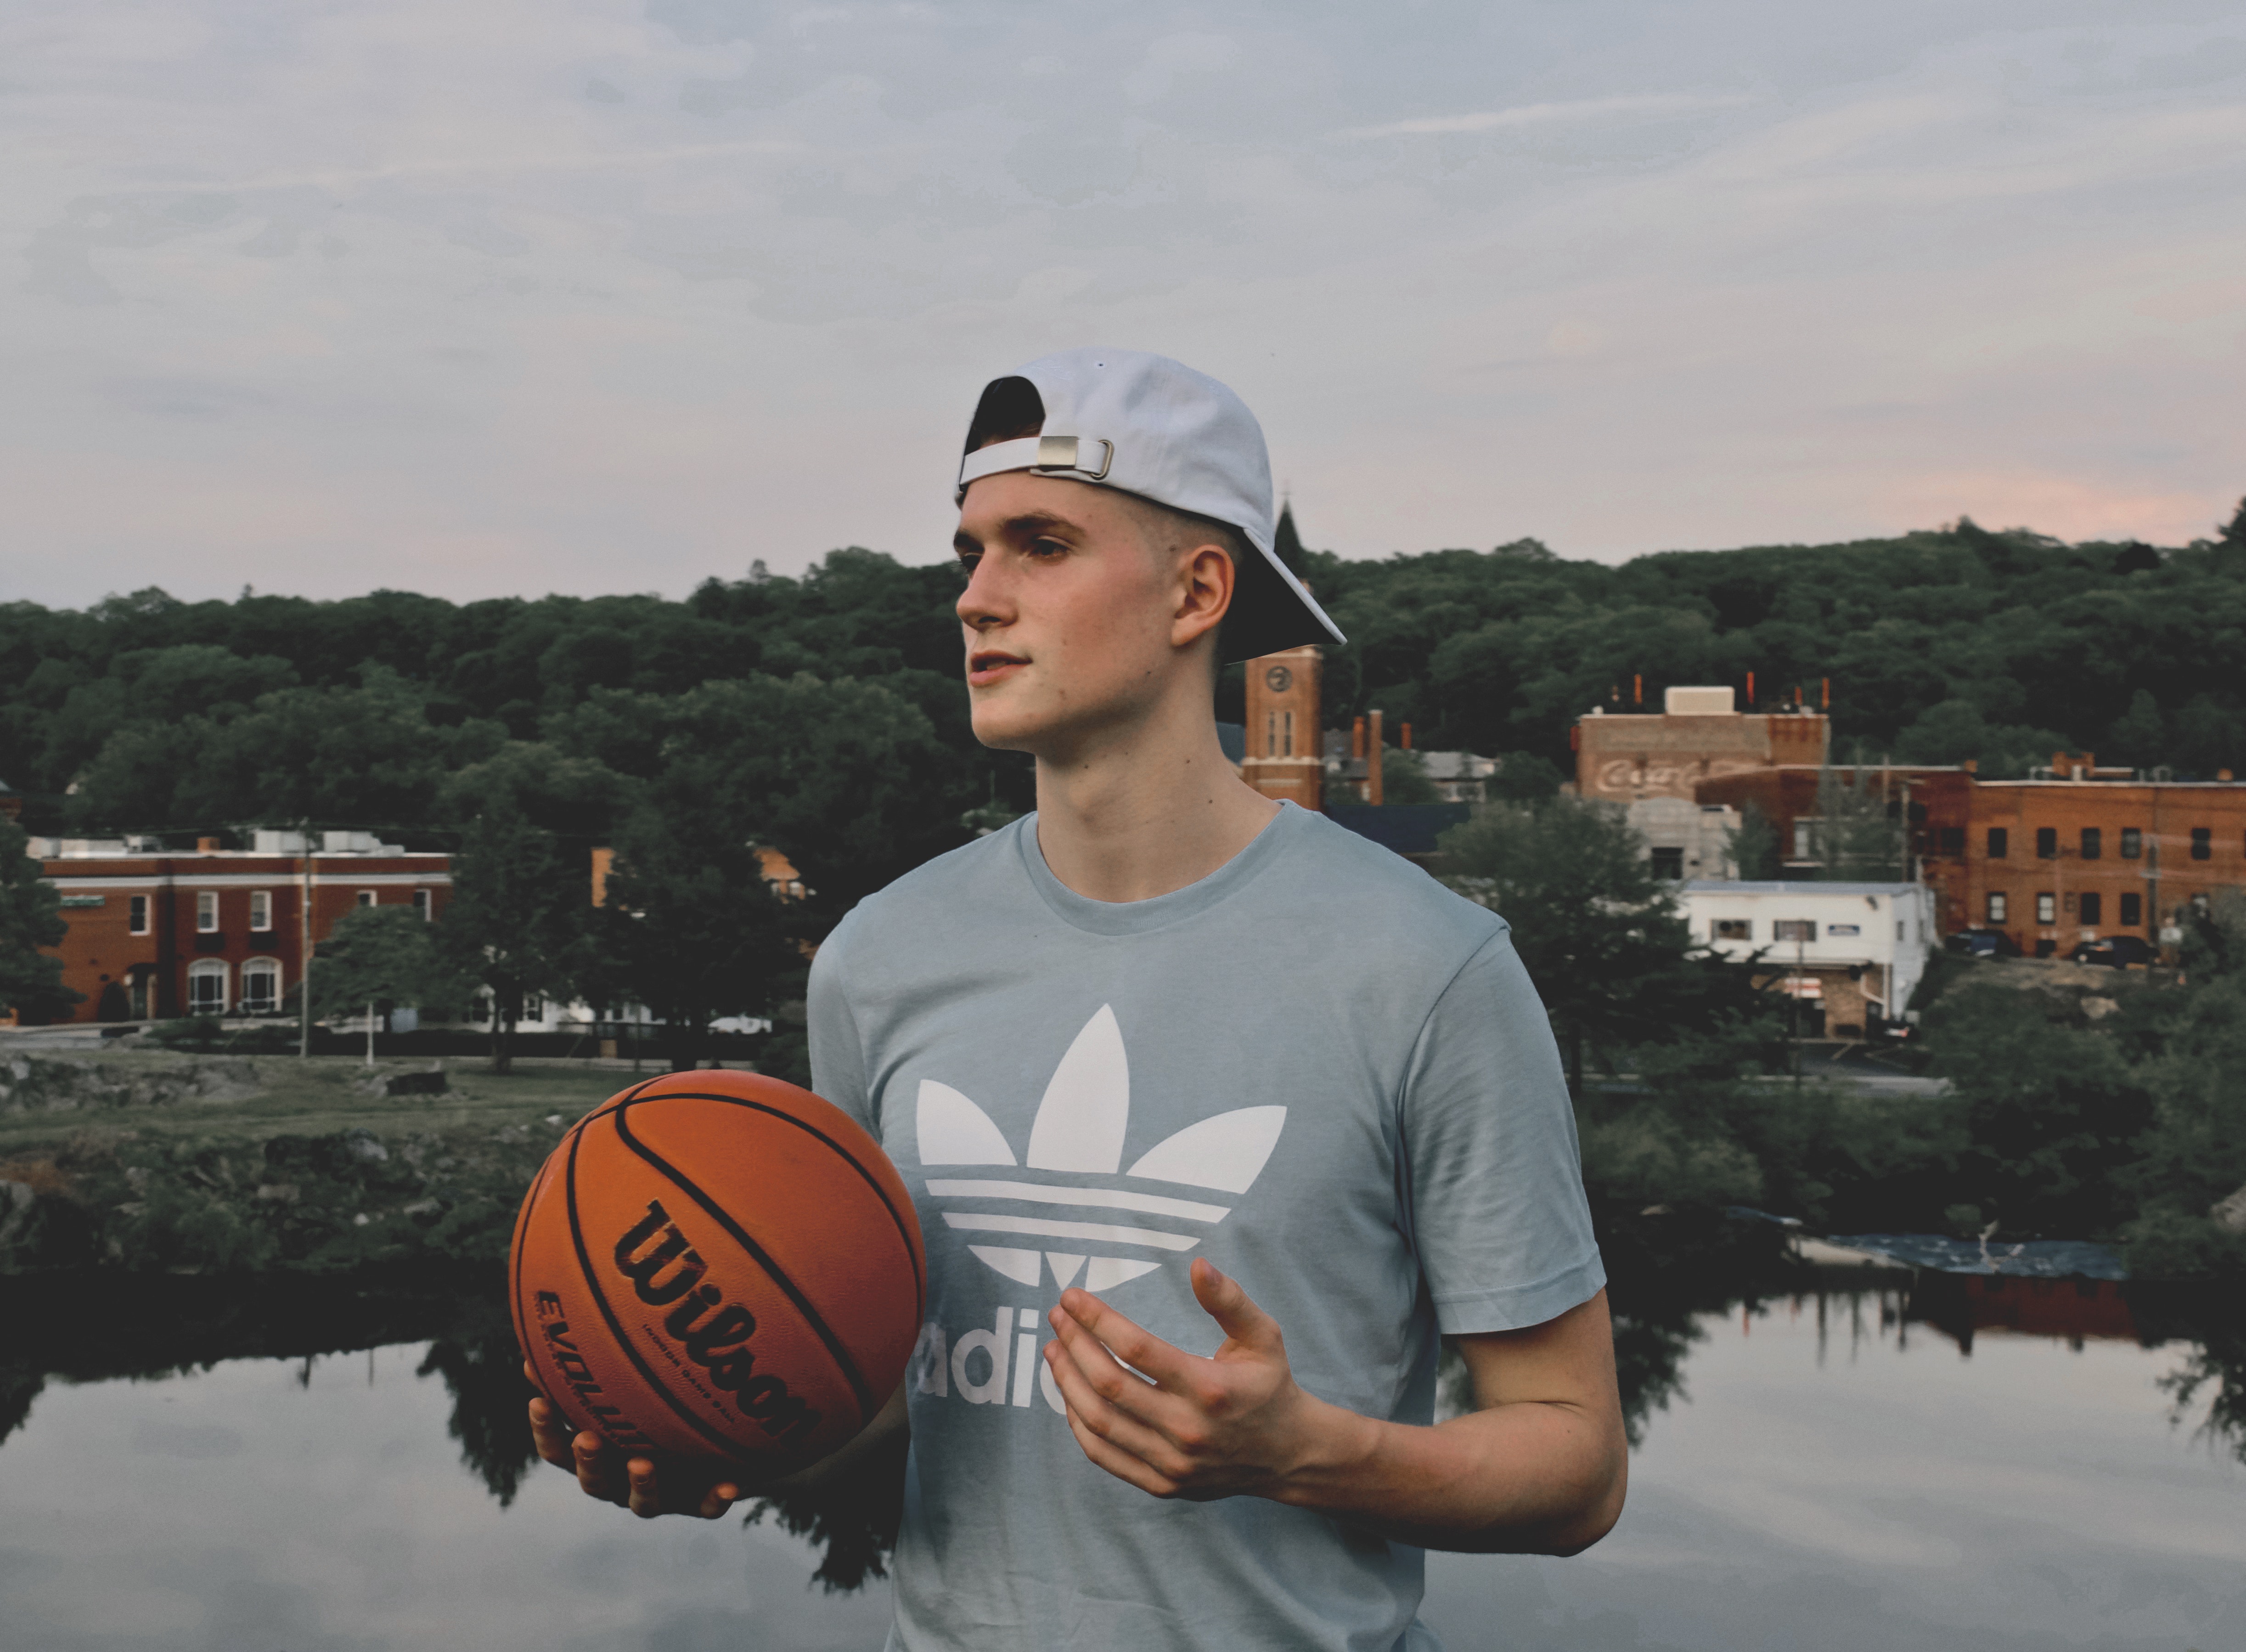 Man Wearing Gray Crew Neck Shirt Holding Basketball, Athlete, Outdoors, Water, View, HQ Photo